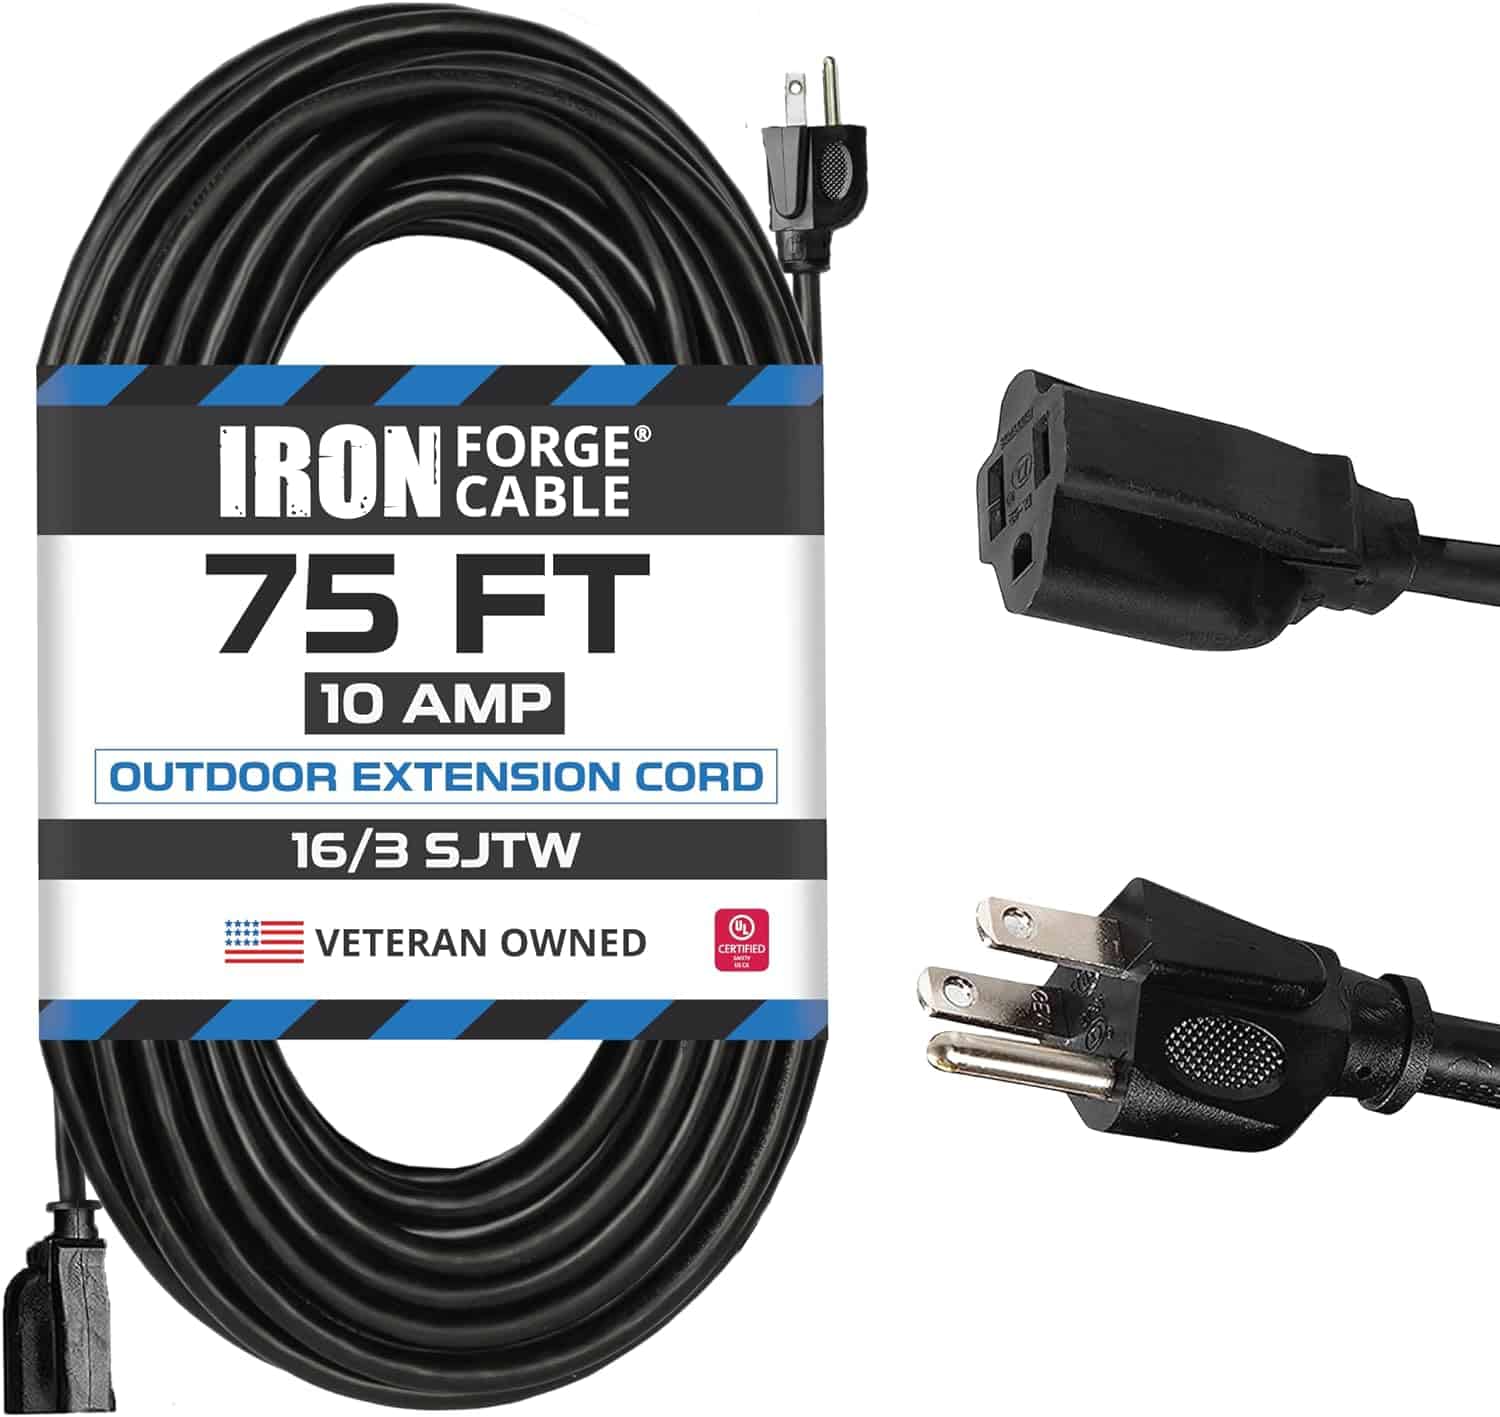 Iron Forge Cable 75 Ft Outdoor Extension Cord 16 3 Black 75 Foot Extension Cord Indoor Outdoor Use 3 Prong Weatherproof Exterior Extension Cord Gr 1